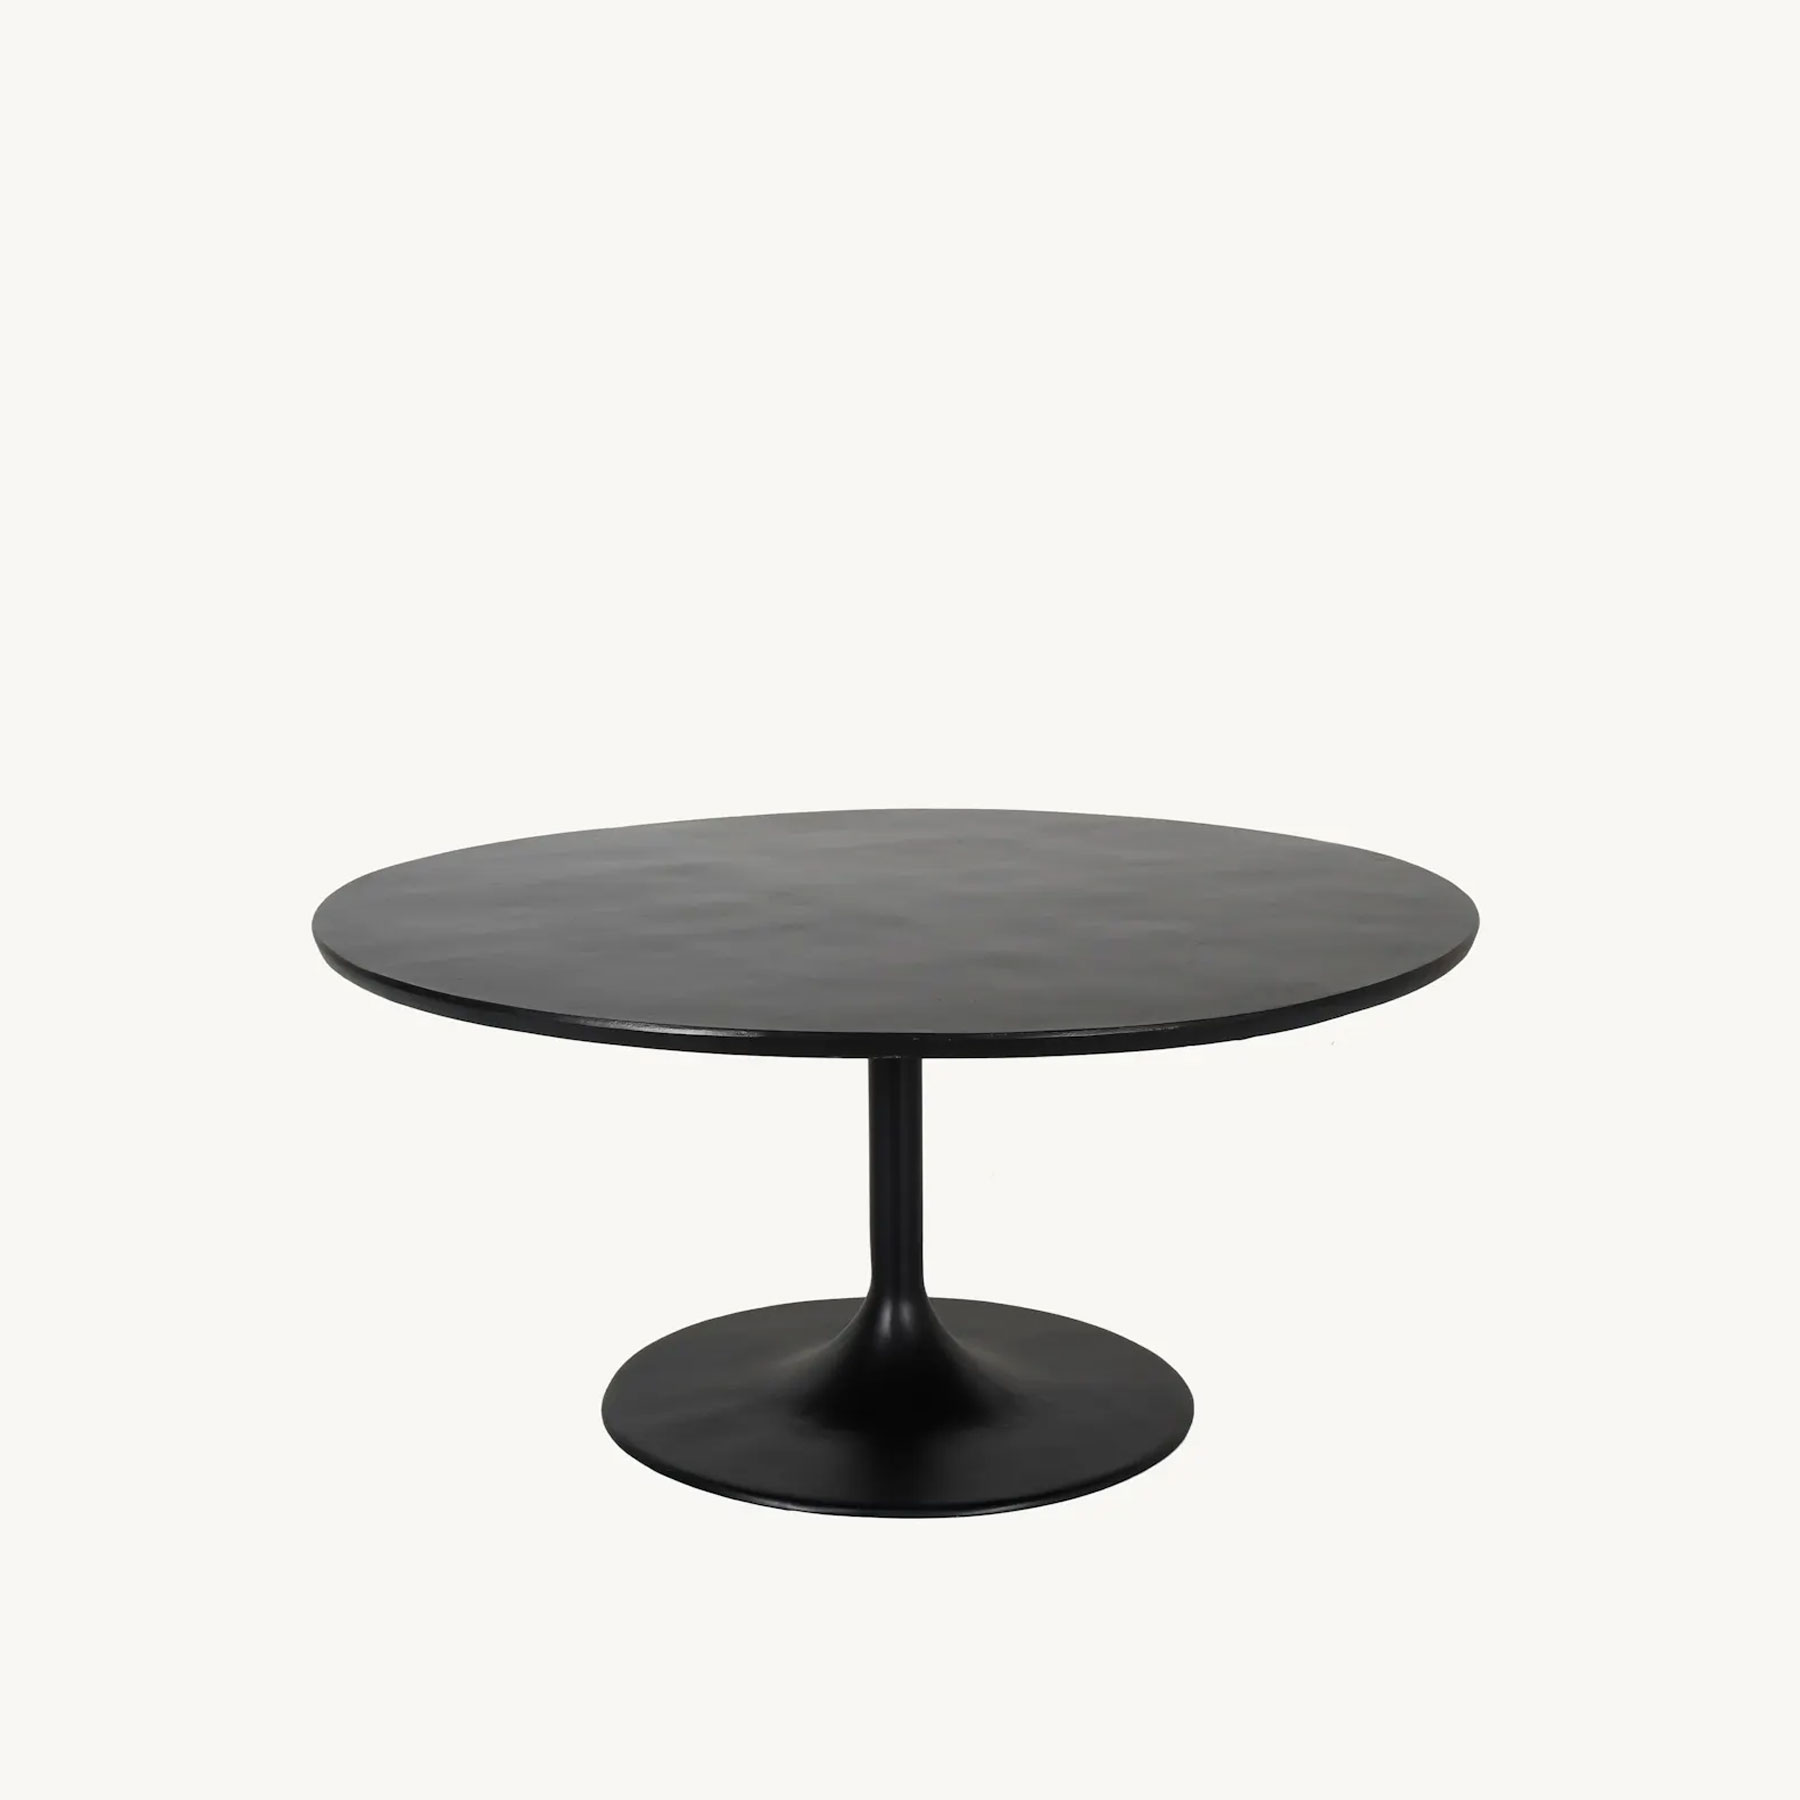 Castelle Tulip 50 inch Round Dining Height Table